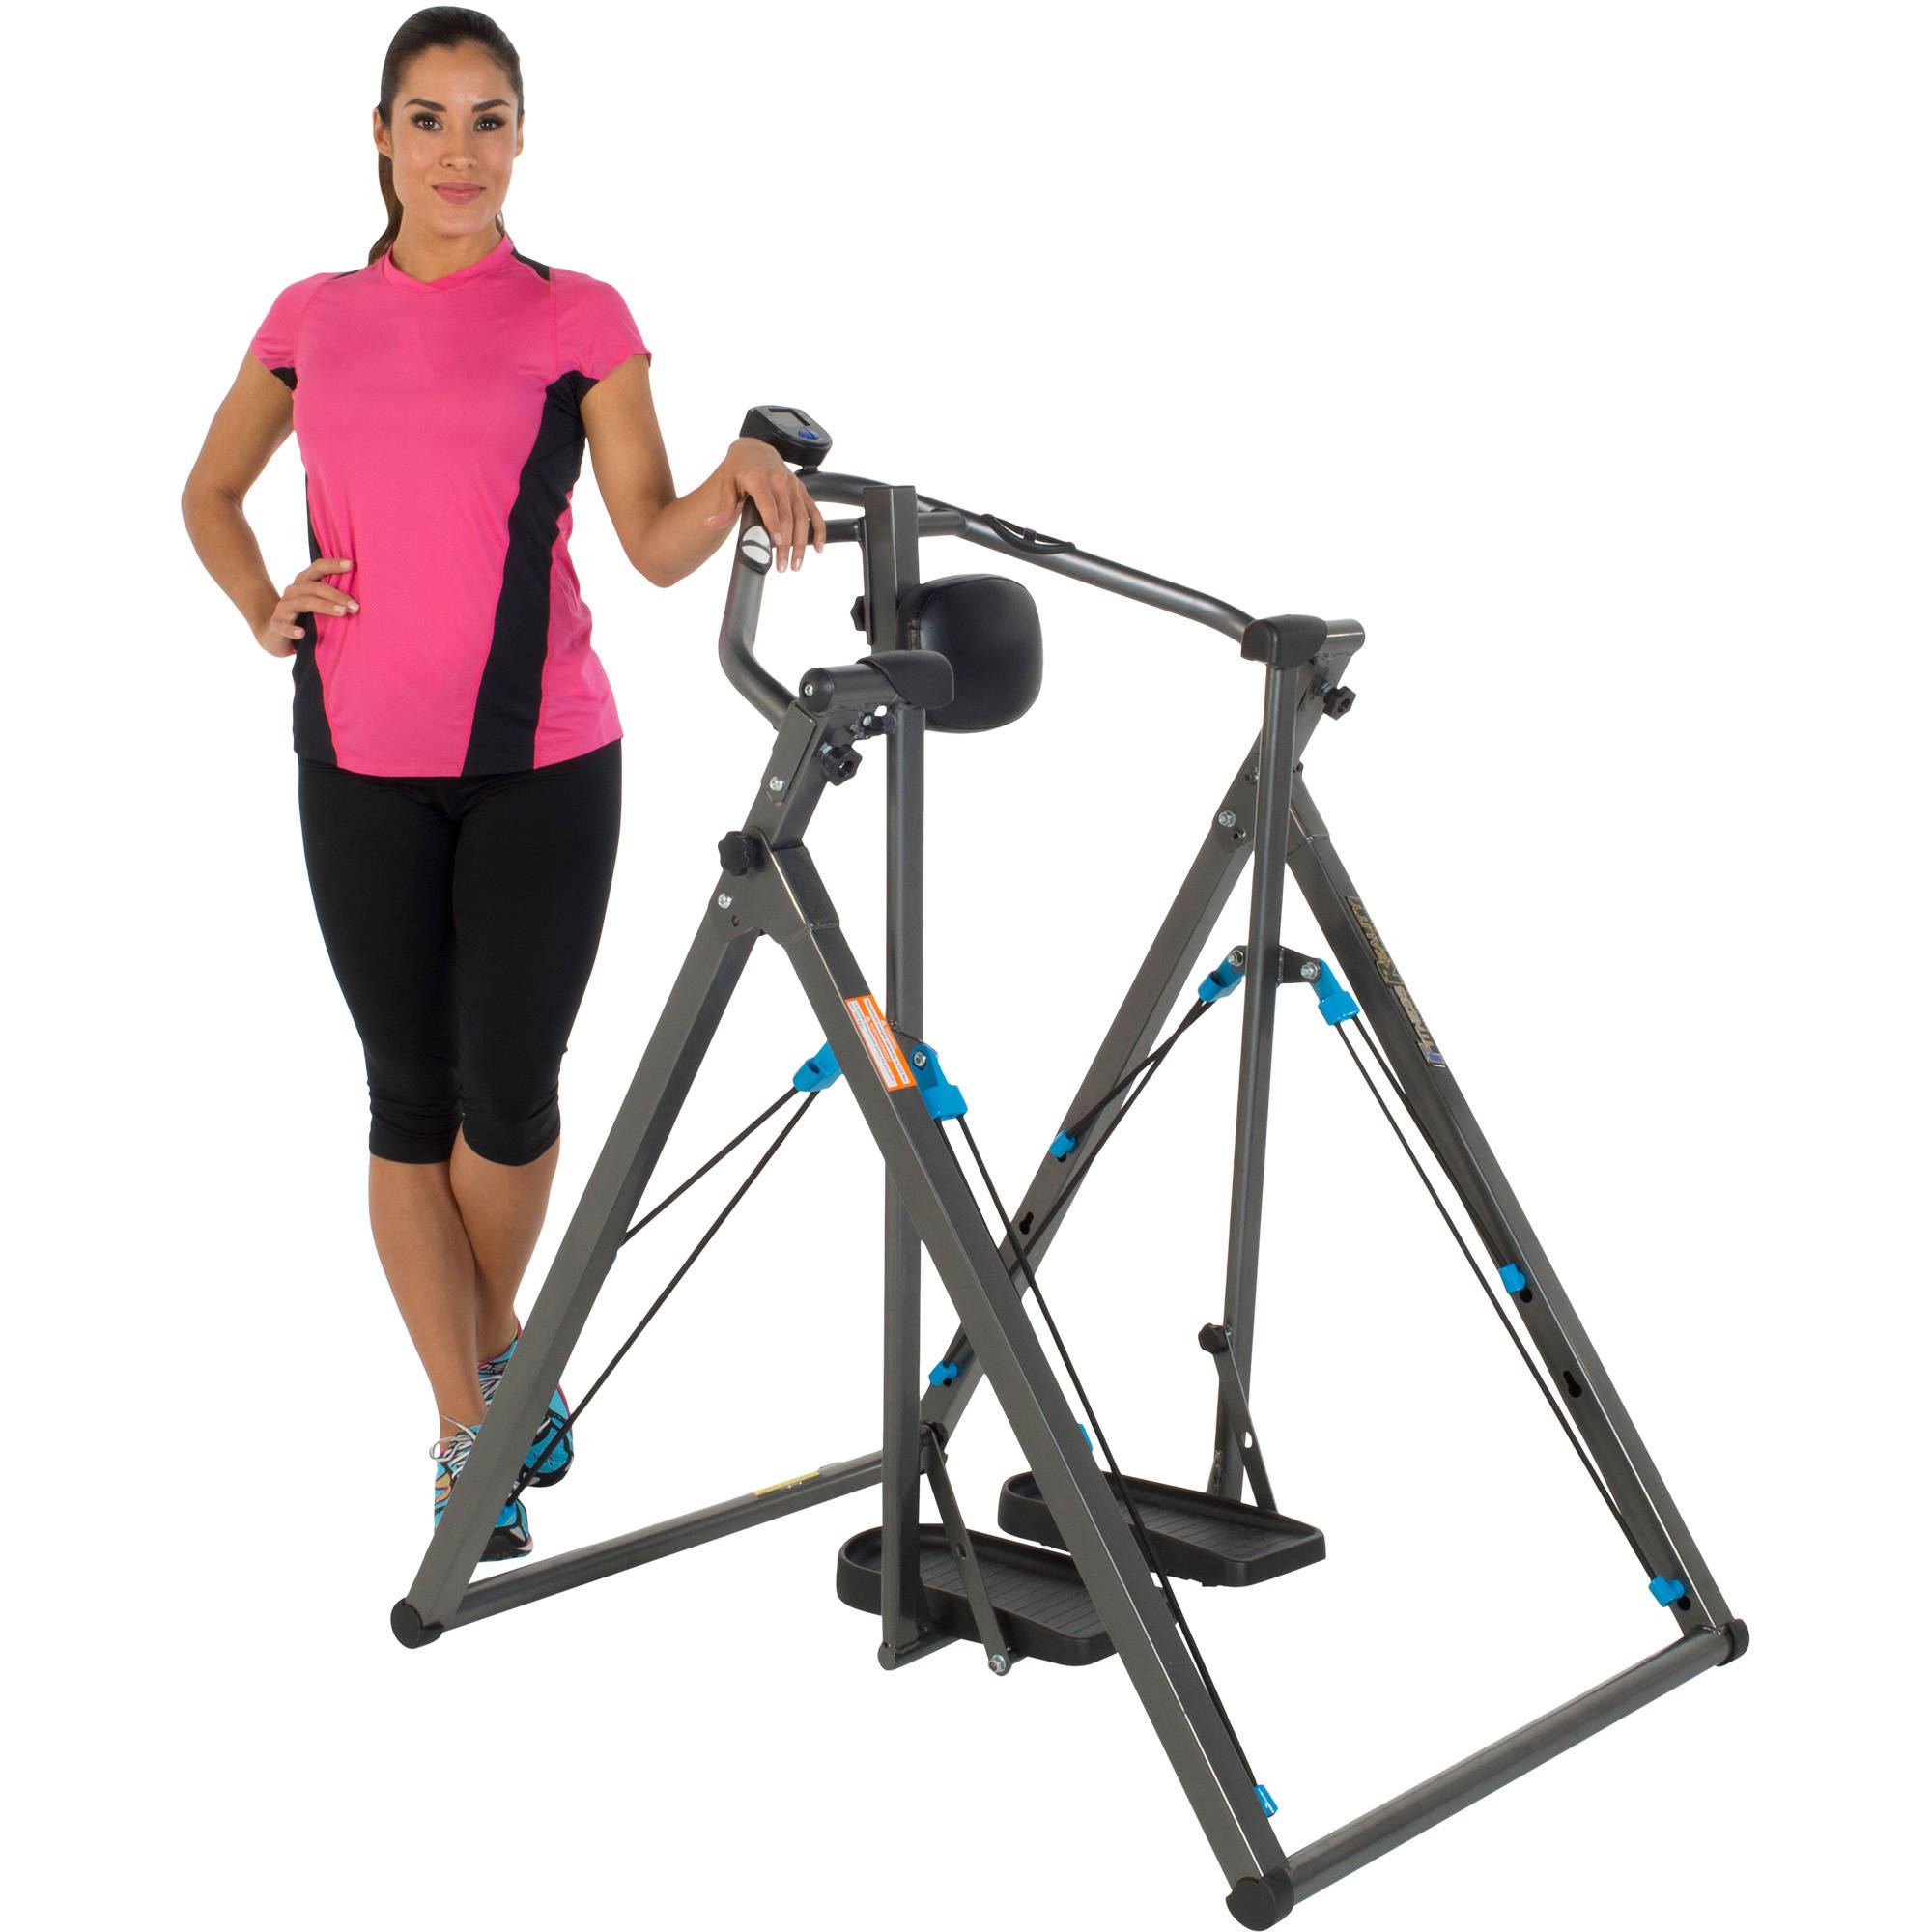 Fitness Reality Zero Impact 48" Stride Elliptical Cloud Walker X3 with Pulse Sensors - image 4 of 24